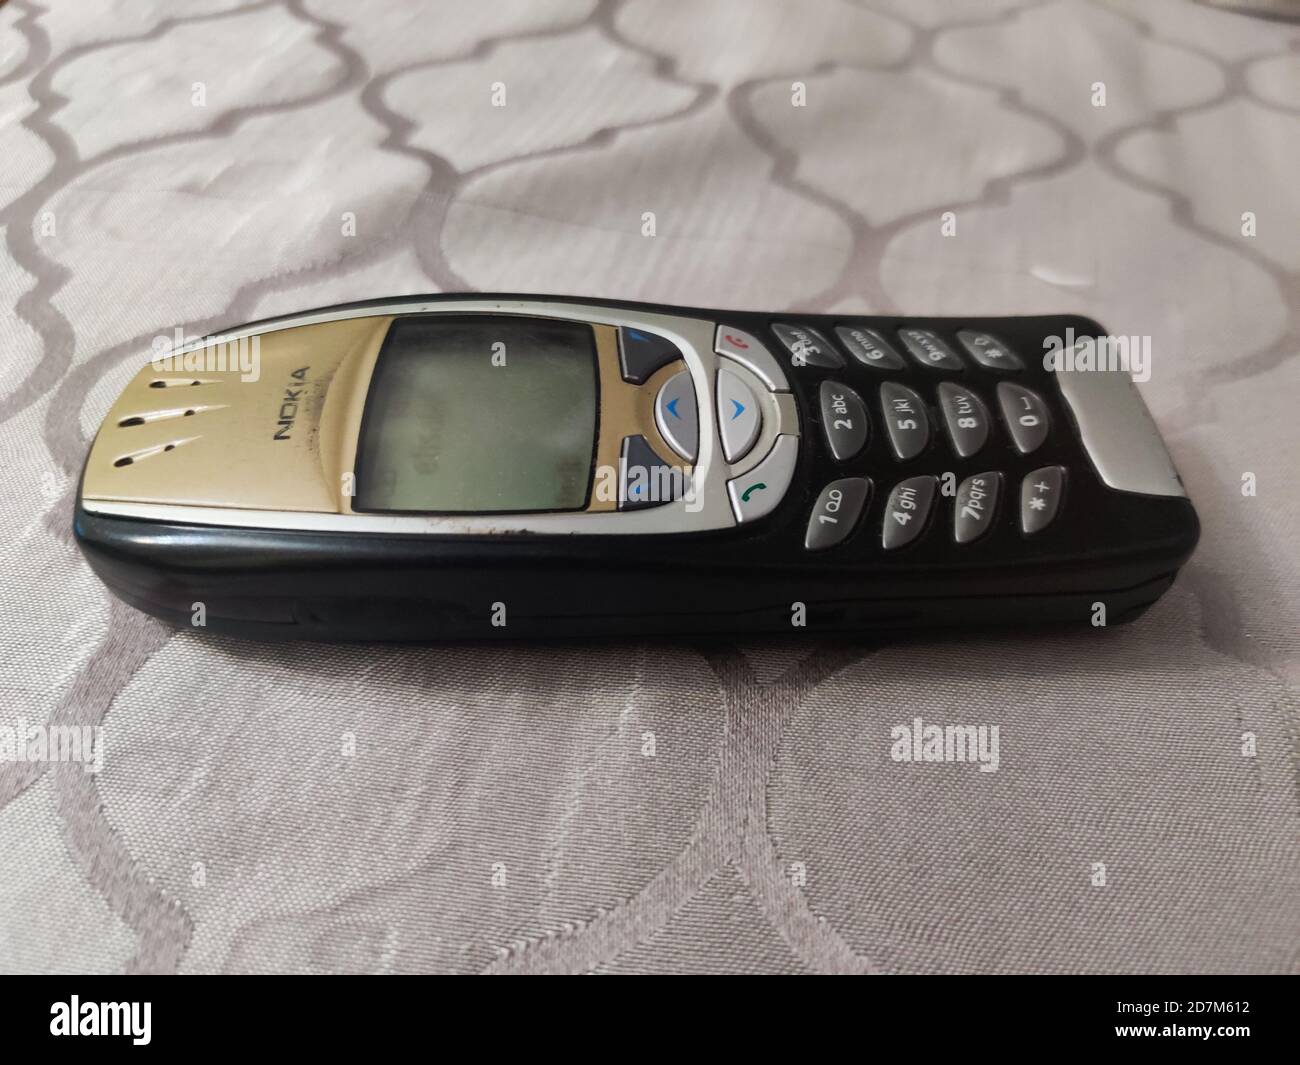 Nokia old Mobile Phone in black and gold colors, Nokia's most popular phone launched in the 2000's Stock Photo